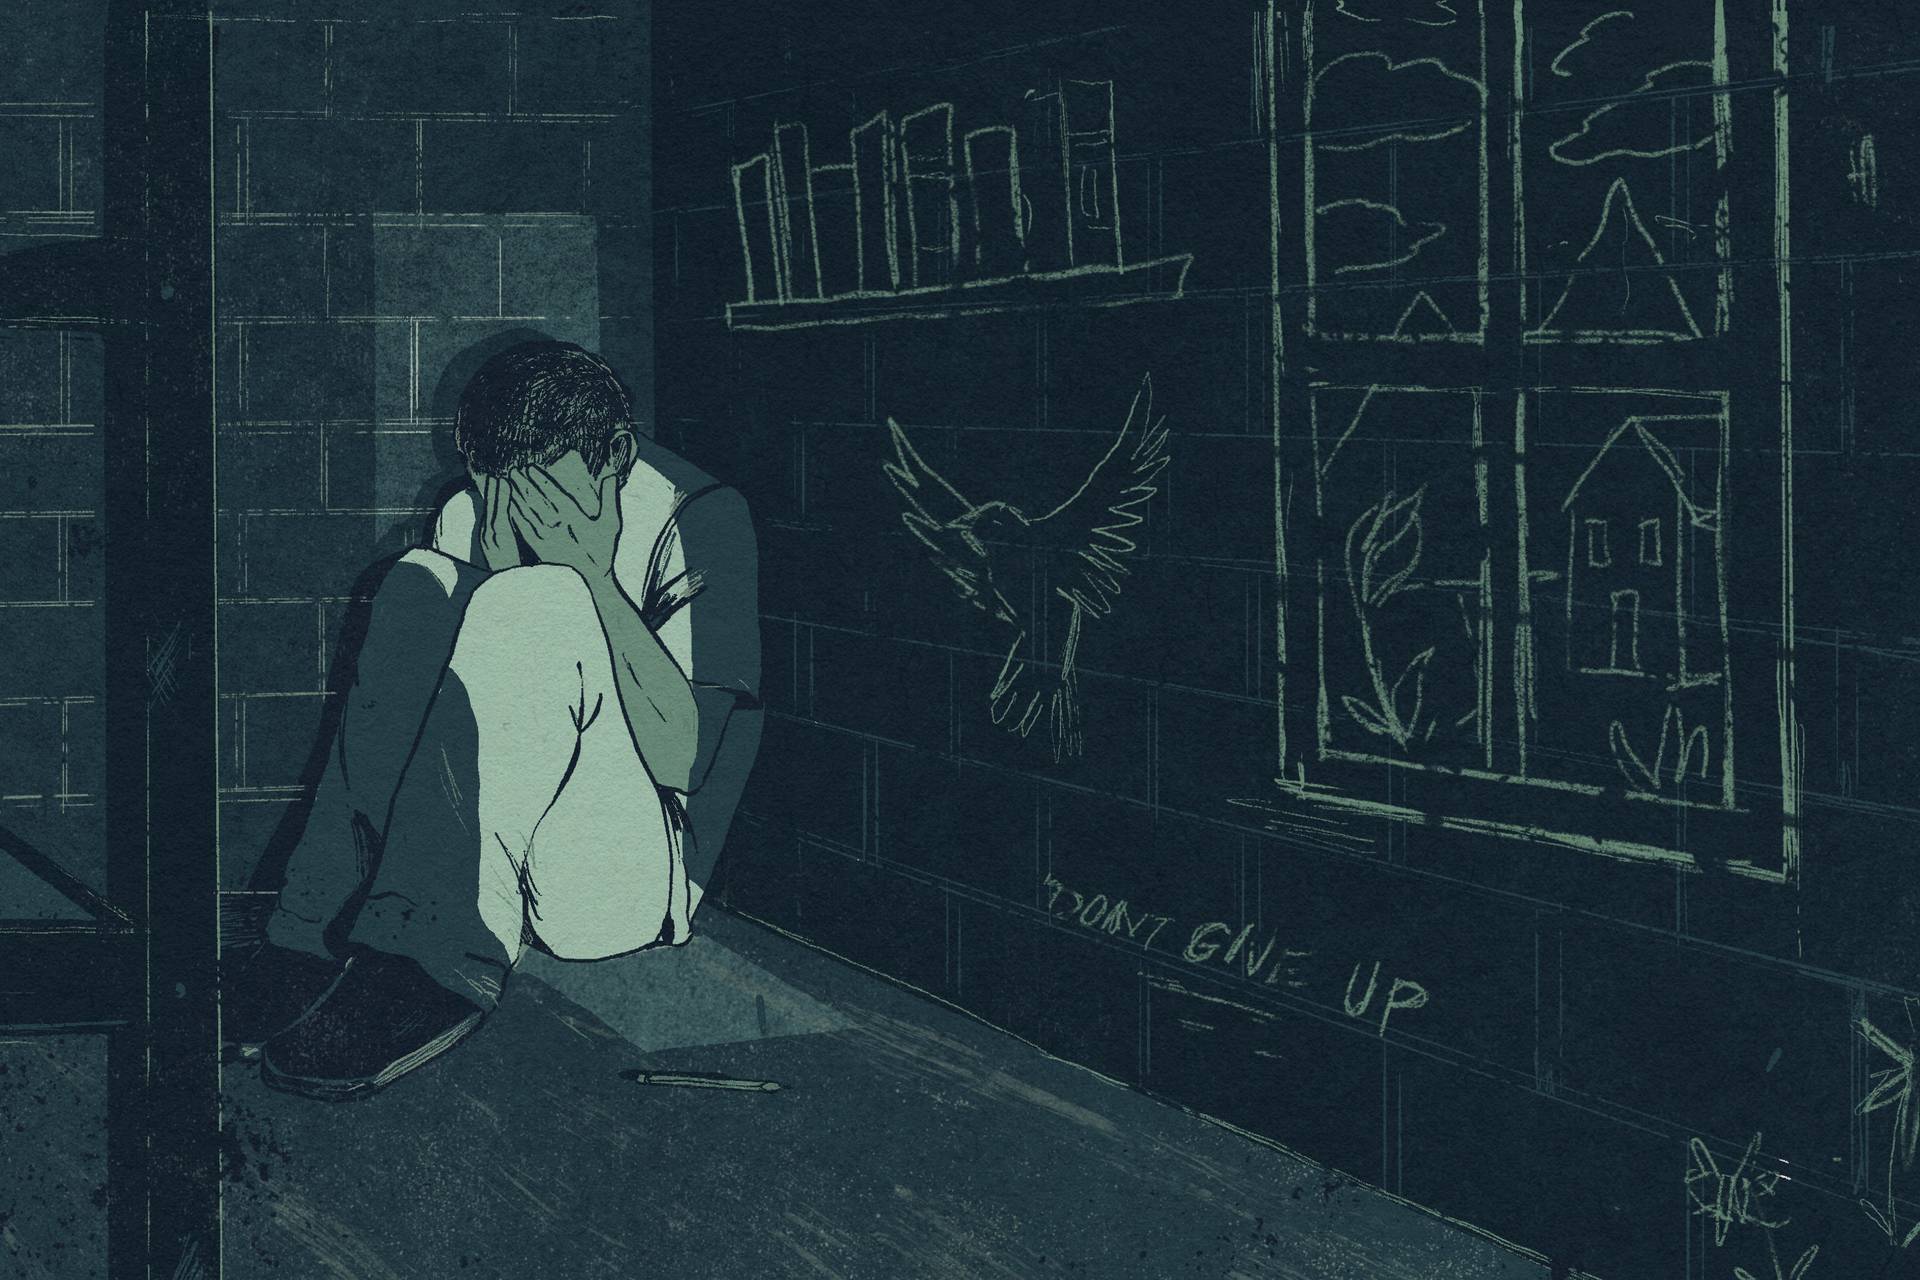 Illustration of inmate sitting in corner of dark prison cell with cinder block walls, holding hands over his face. The wall to his right is covered with drawings that show a bookshelf, a bird and a window to the outside.